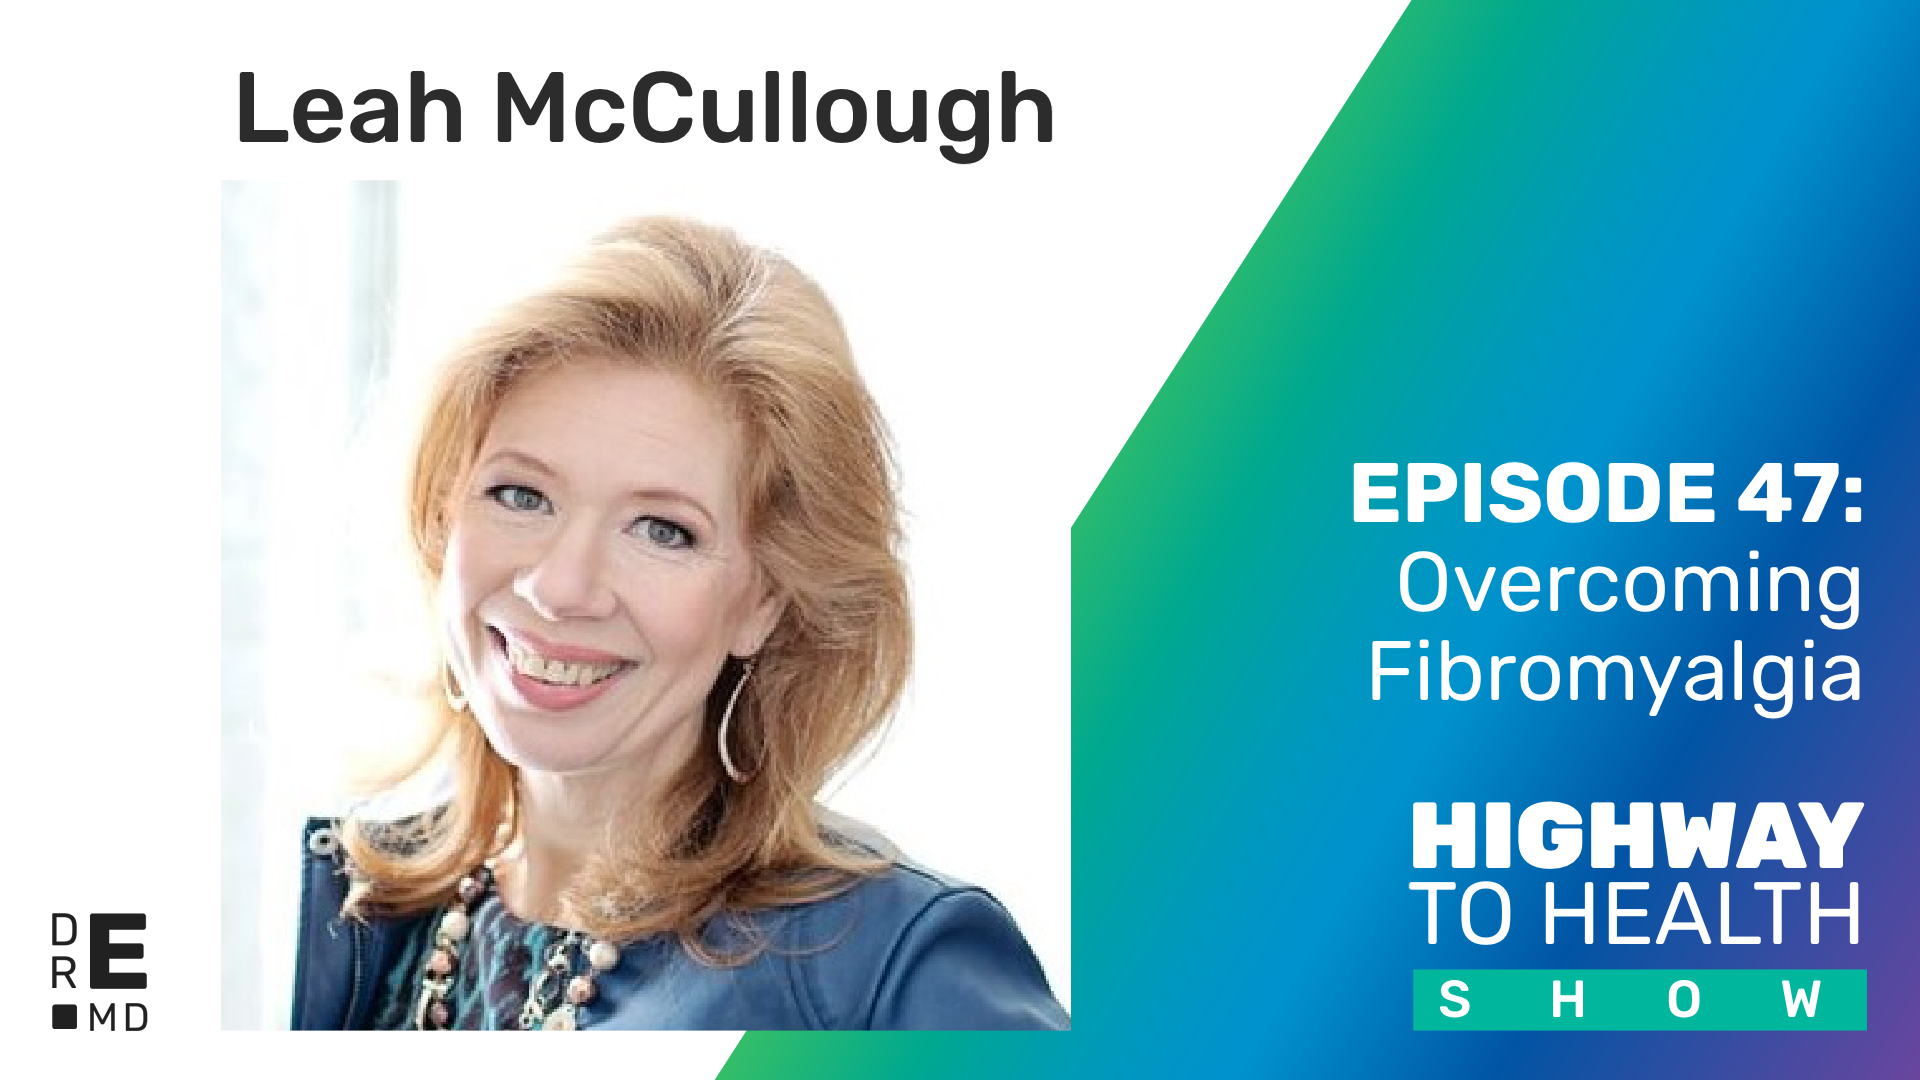 Highway to Health: Ep 47 Leah McCullough